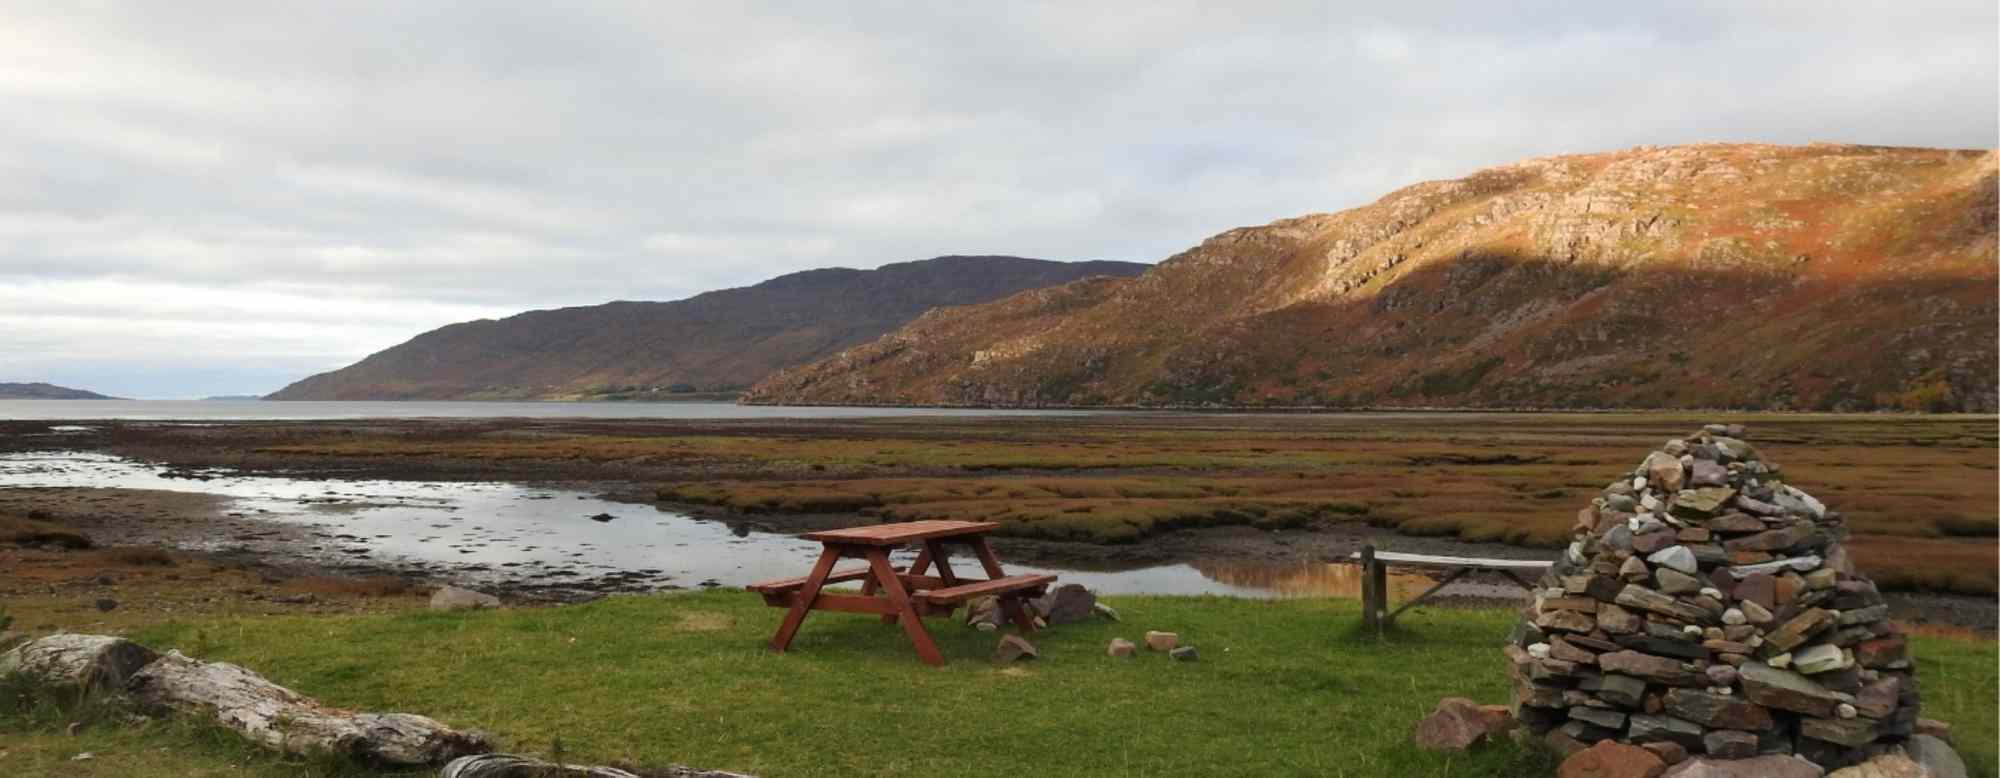 10 Important Things To Know Before Visiting the Highlands